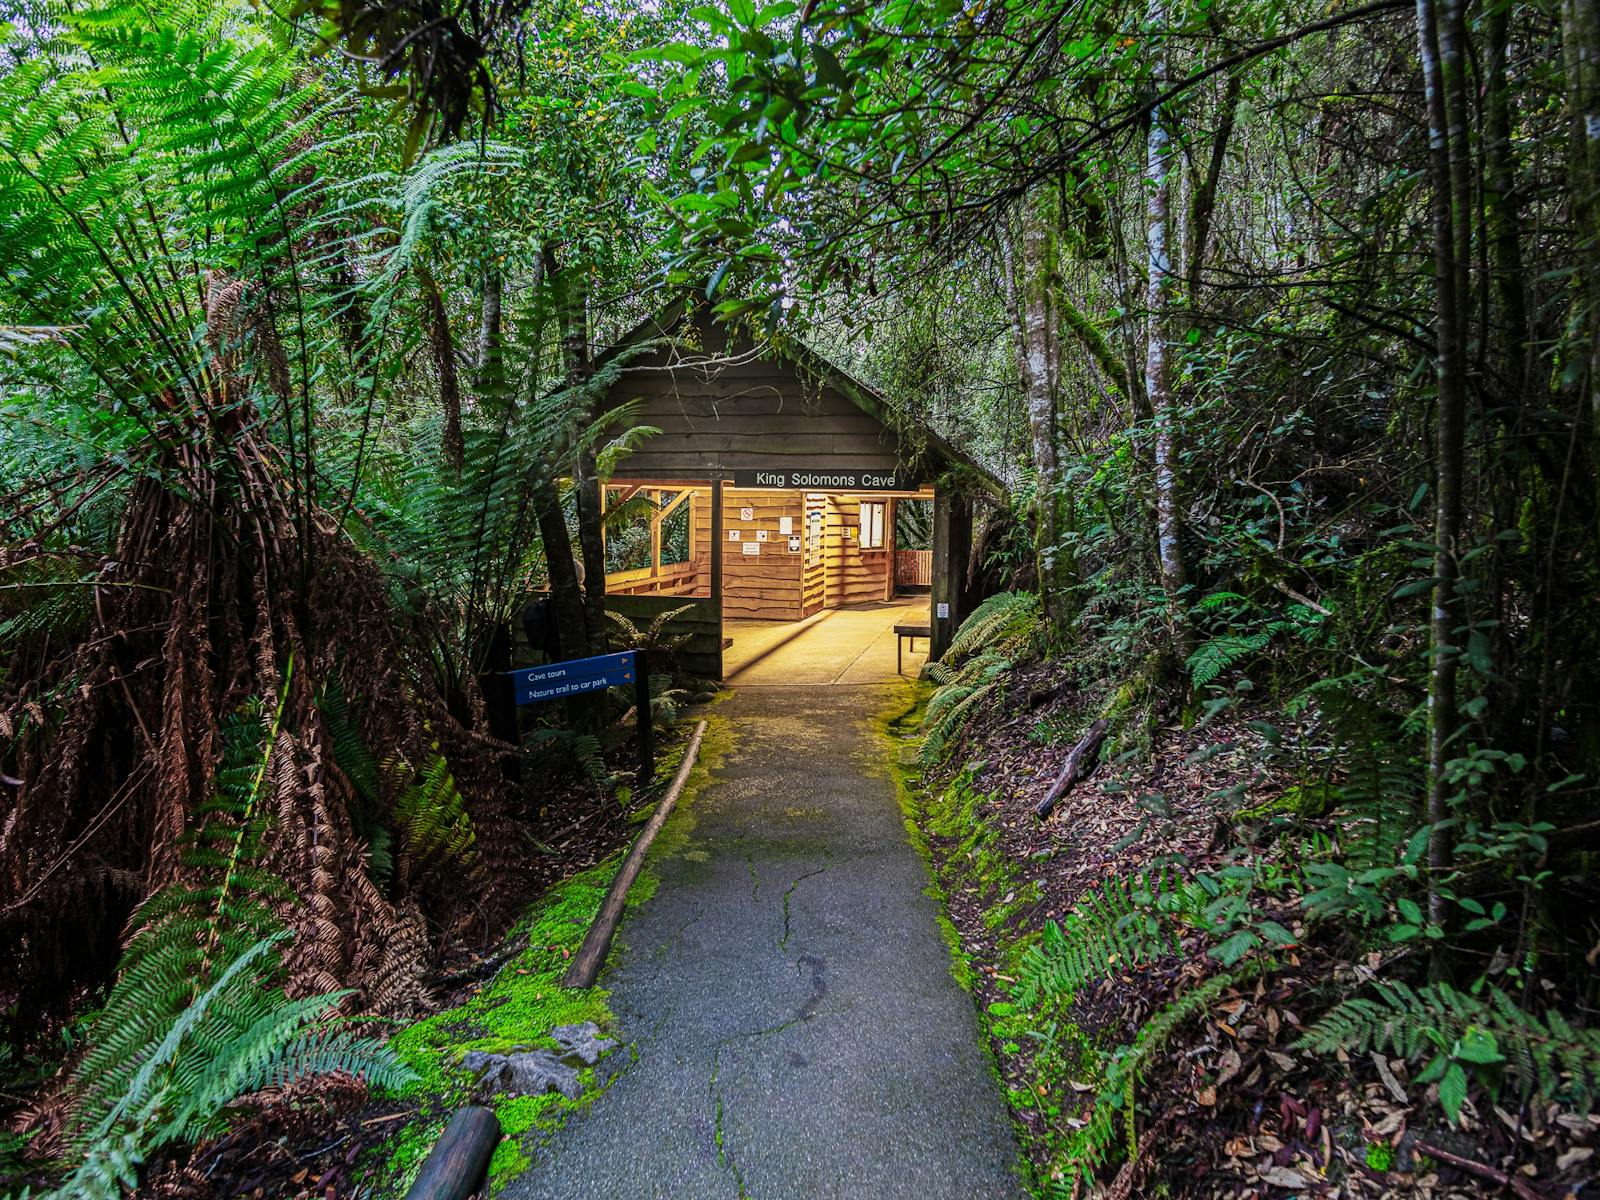 The entrance to King Solomons cave  is surrounded by  lush verdant rainforest and winding paths.